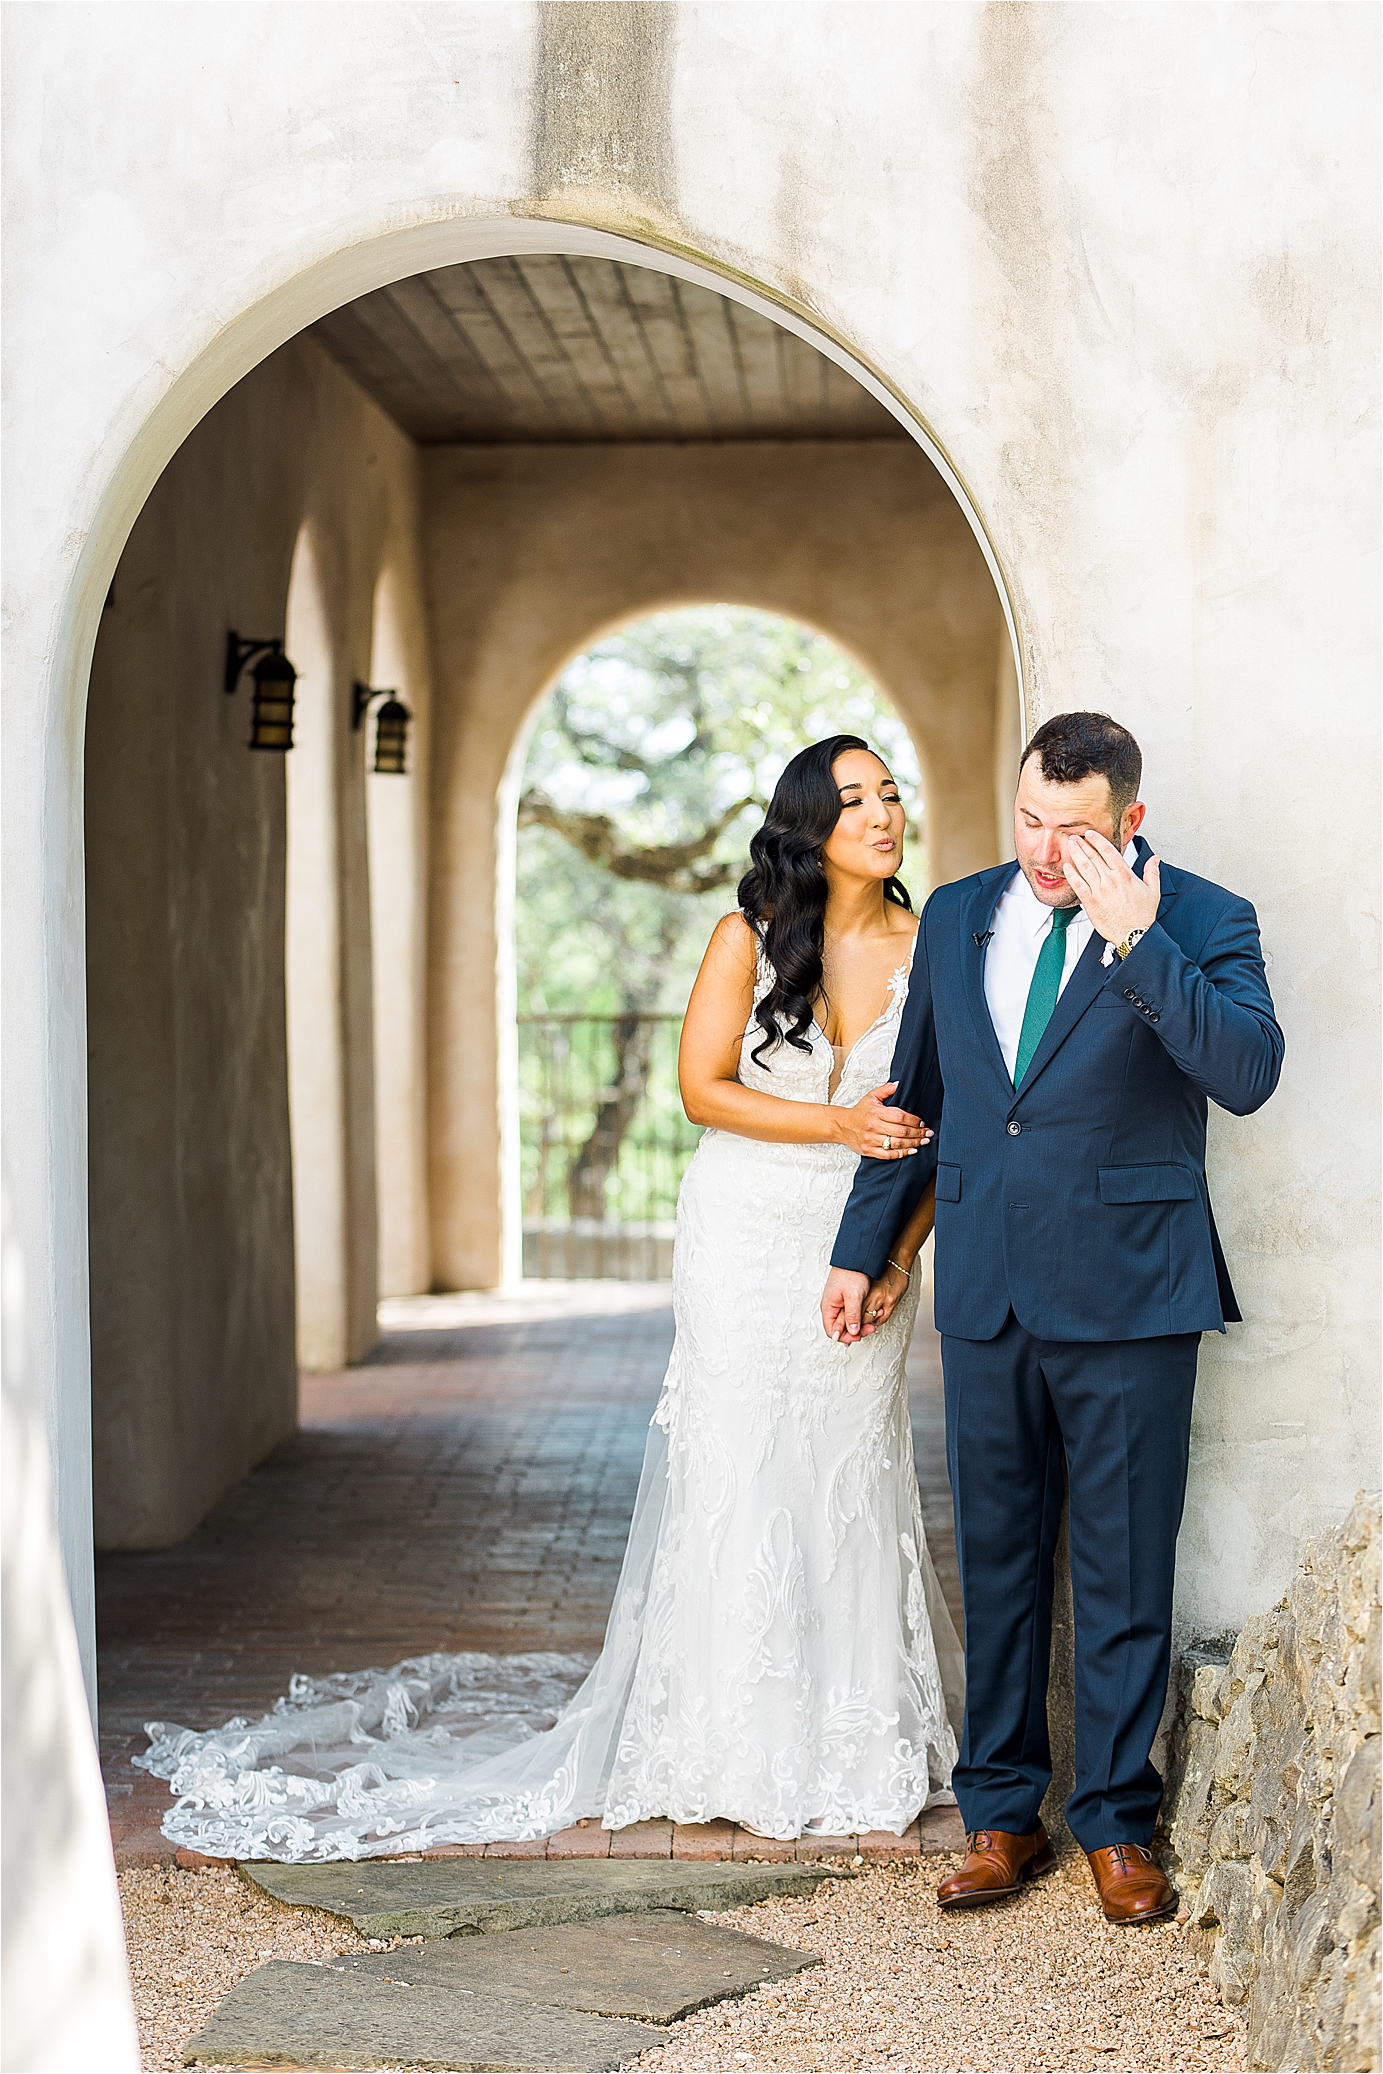 A bride and groom share a first touch before walking down the aisle at Lost Mission, a wedding venue in The Texas Hill Country